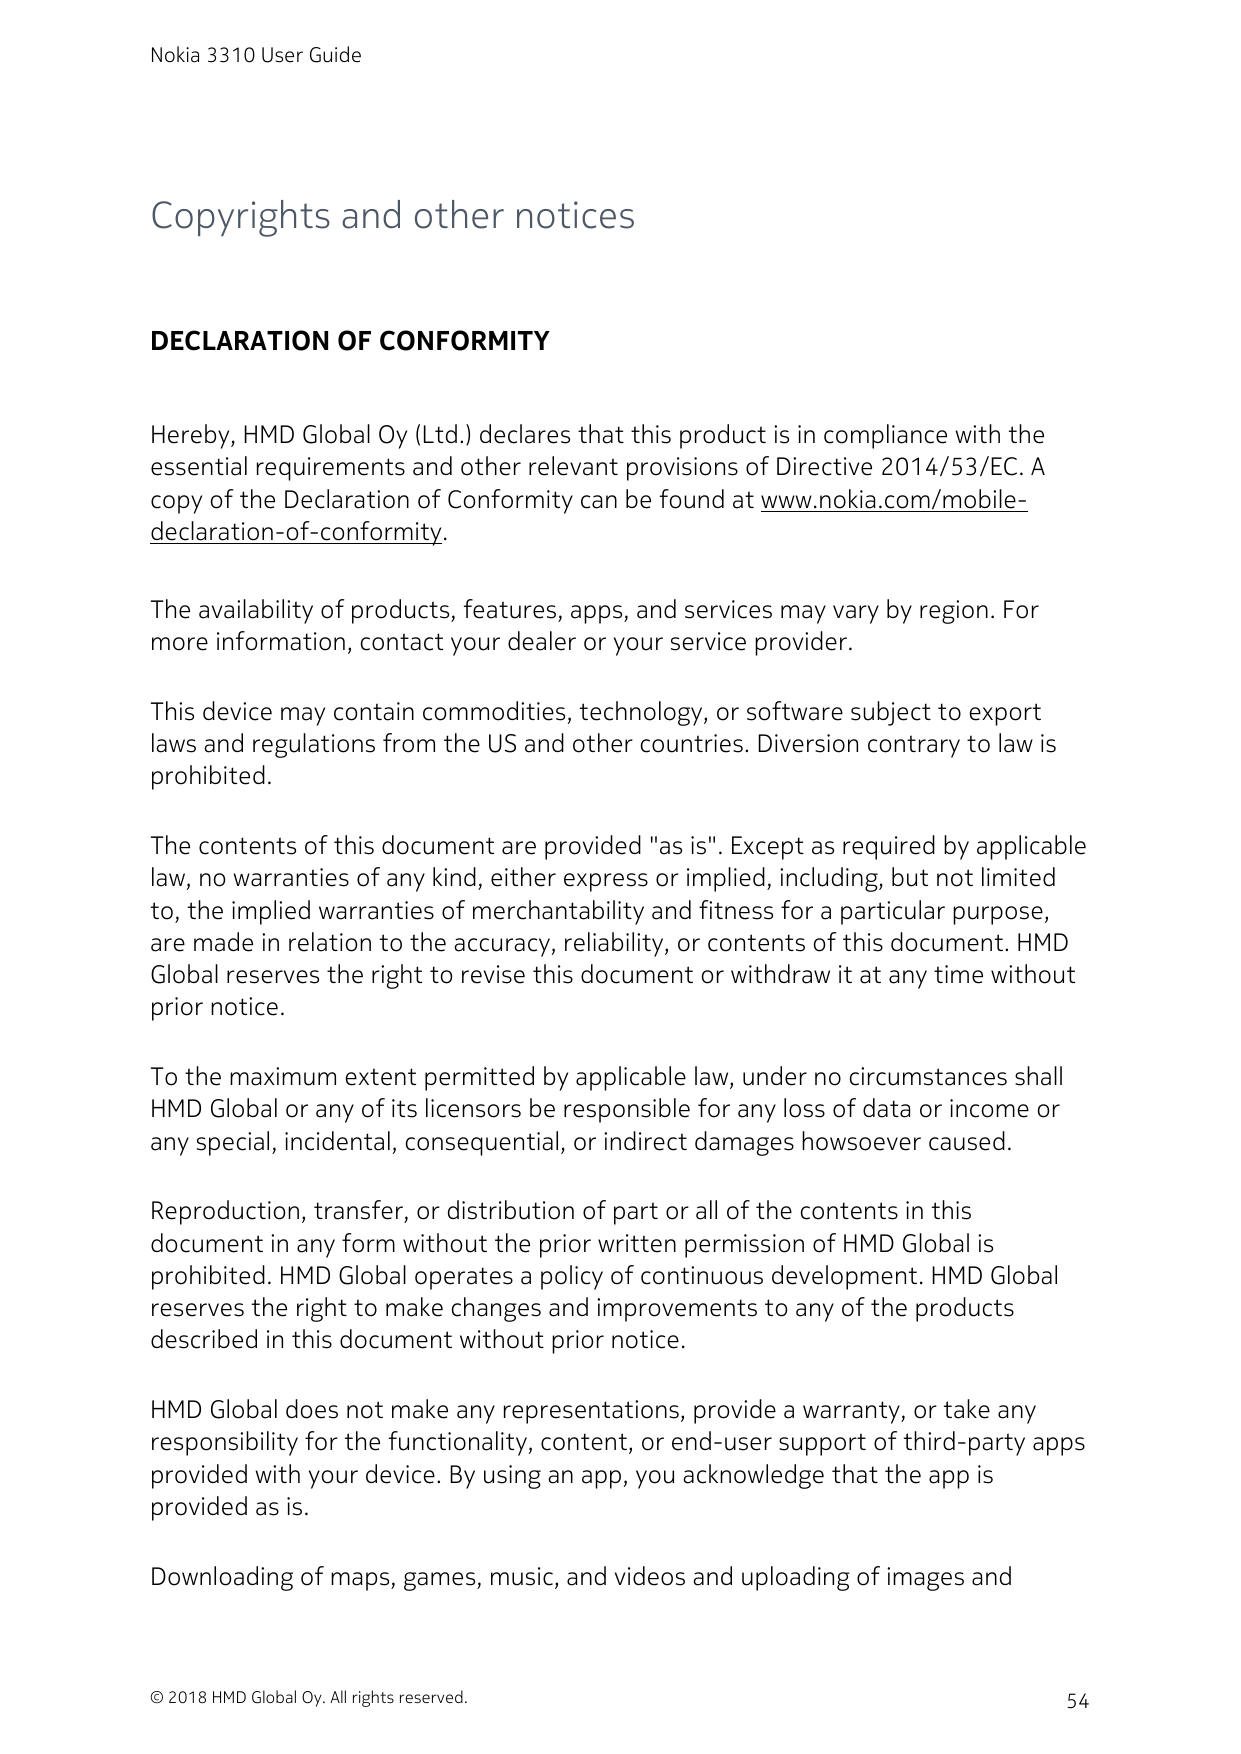 Nokia 3310 User GuideCopyrights and other noticesDECLARATION OF CONFORMITYHereby, HMD Global Oy (Ltd.) declares that this produc